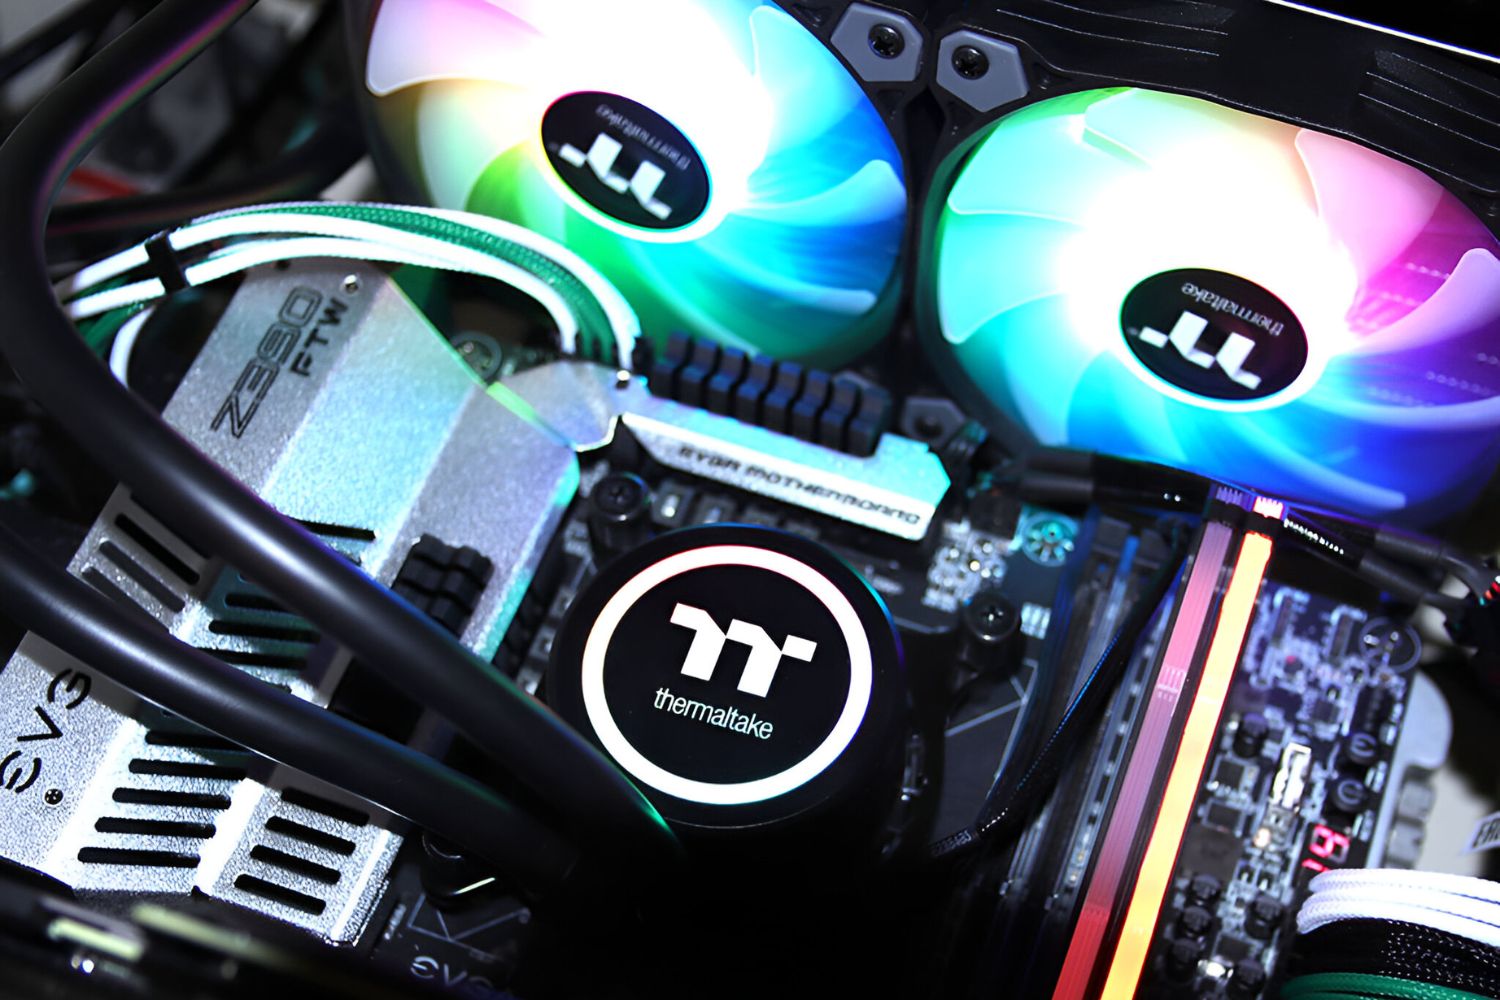 How To Replace Water In Thermaltake CPU Cooler